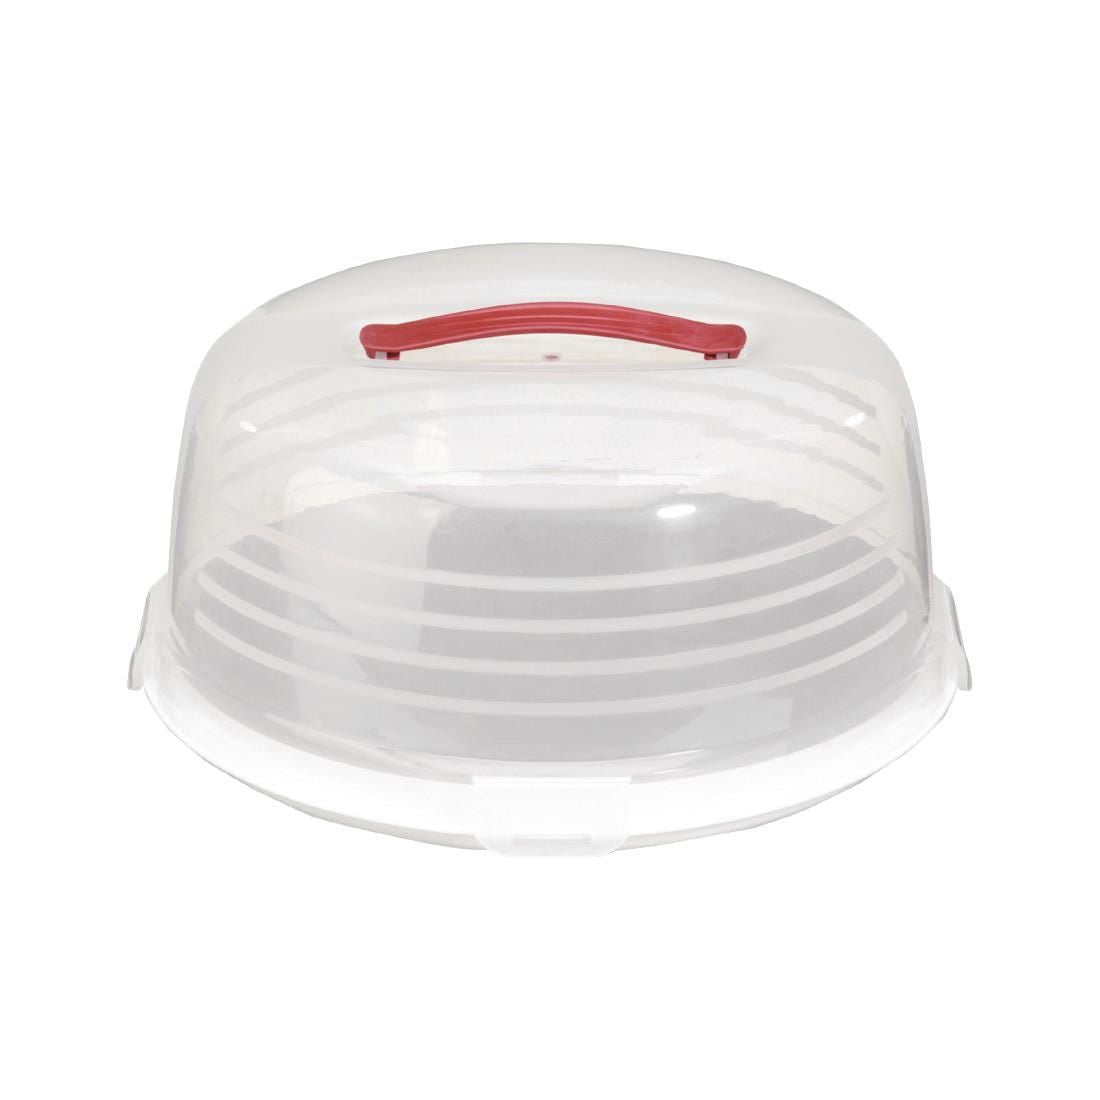 Curver Round Cake Box White 350mm JD Catering Equipment Solutions Ltd